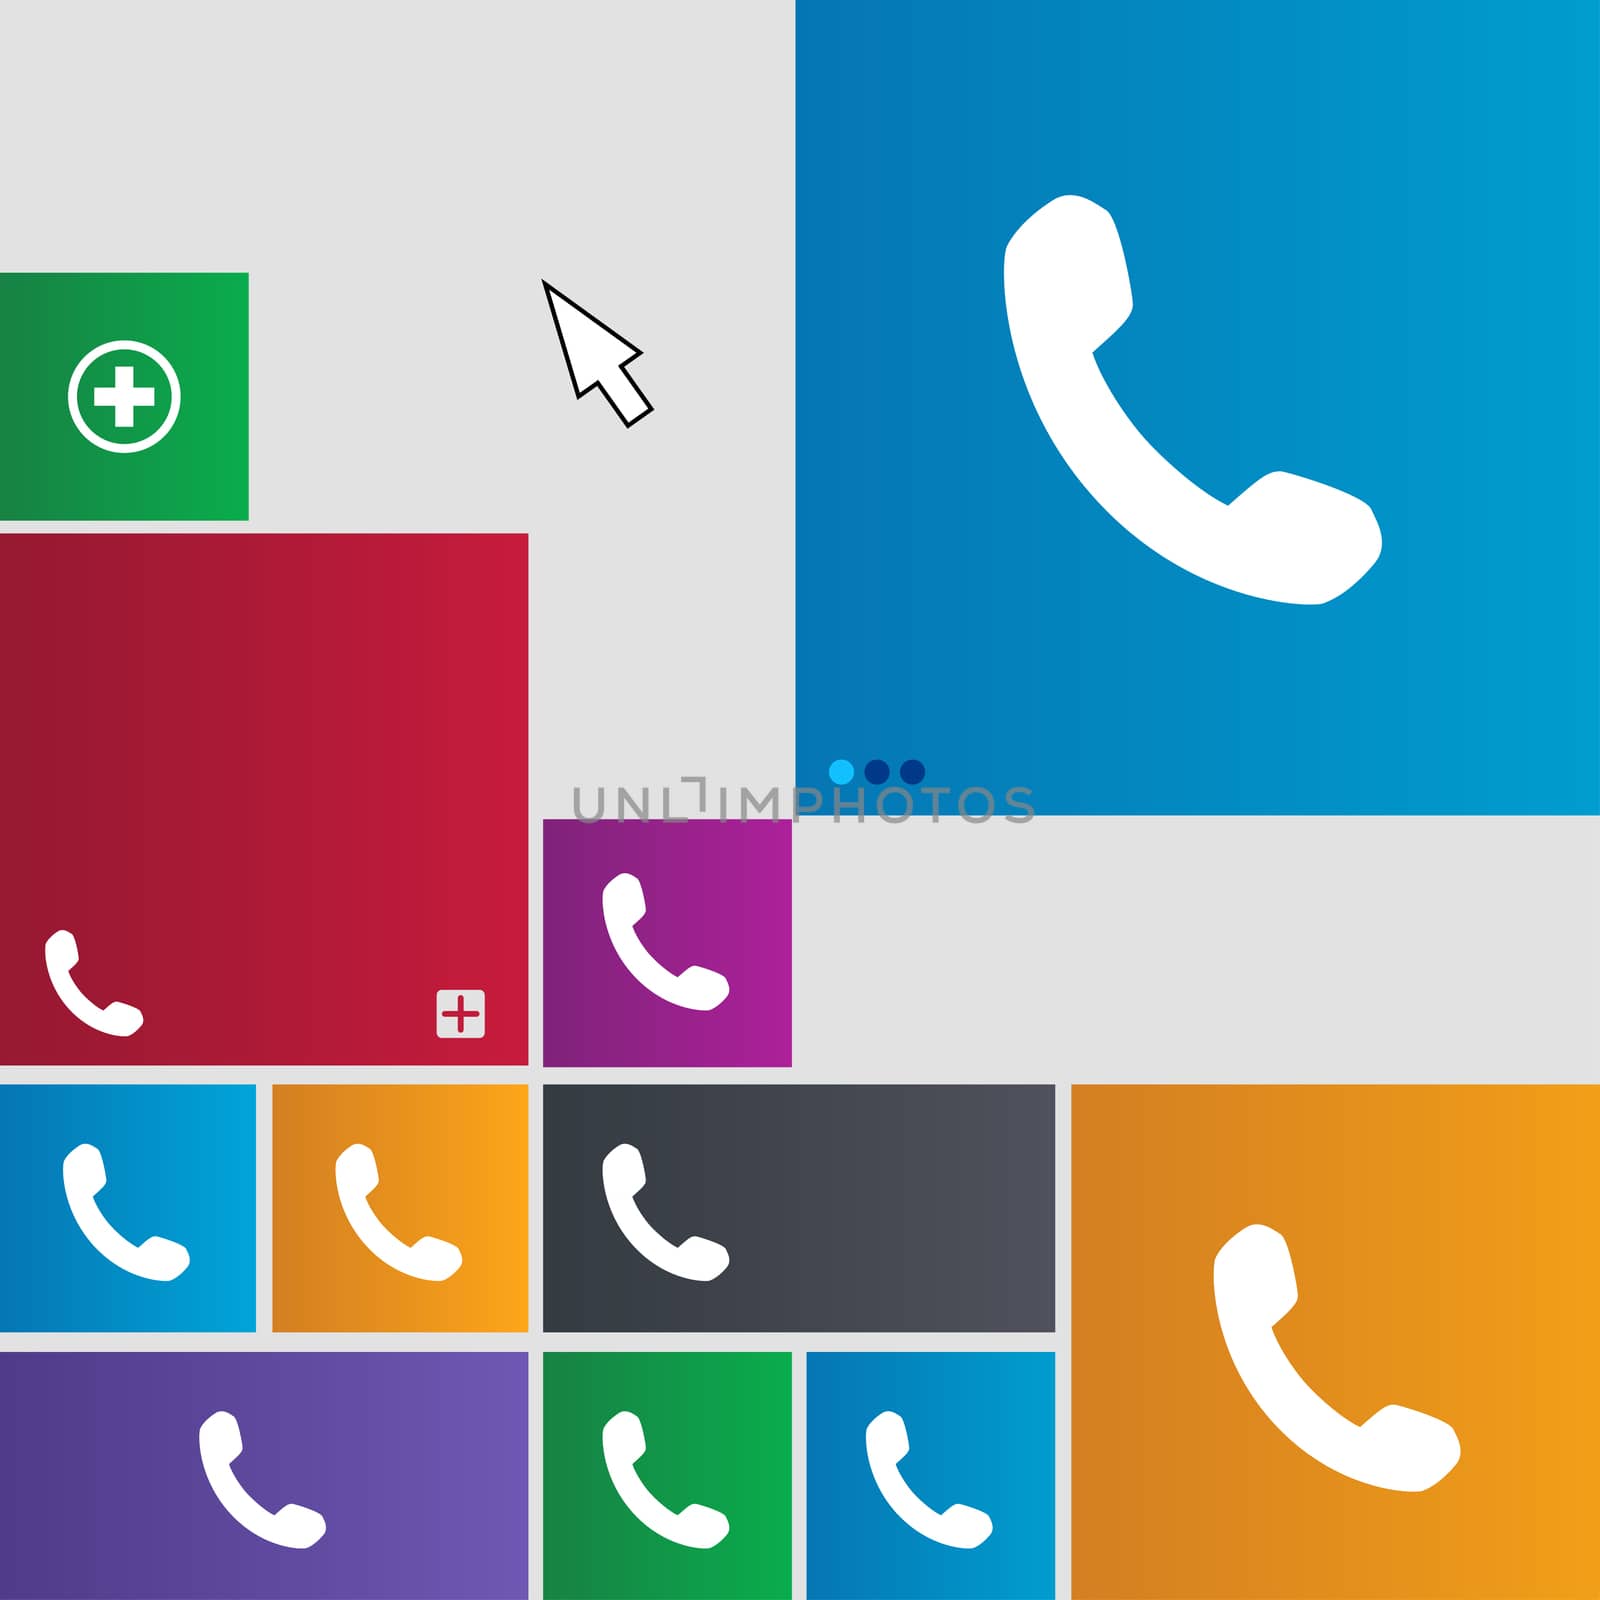 Phone, Support, Call center icon sign. Metro style buttons. Modern interface website buttons with cursor pointer. illustration